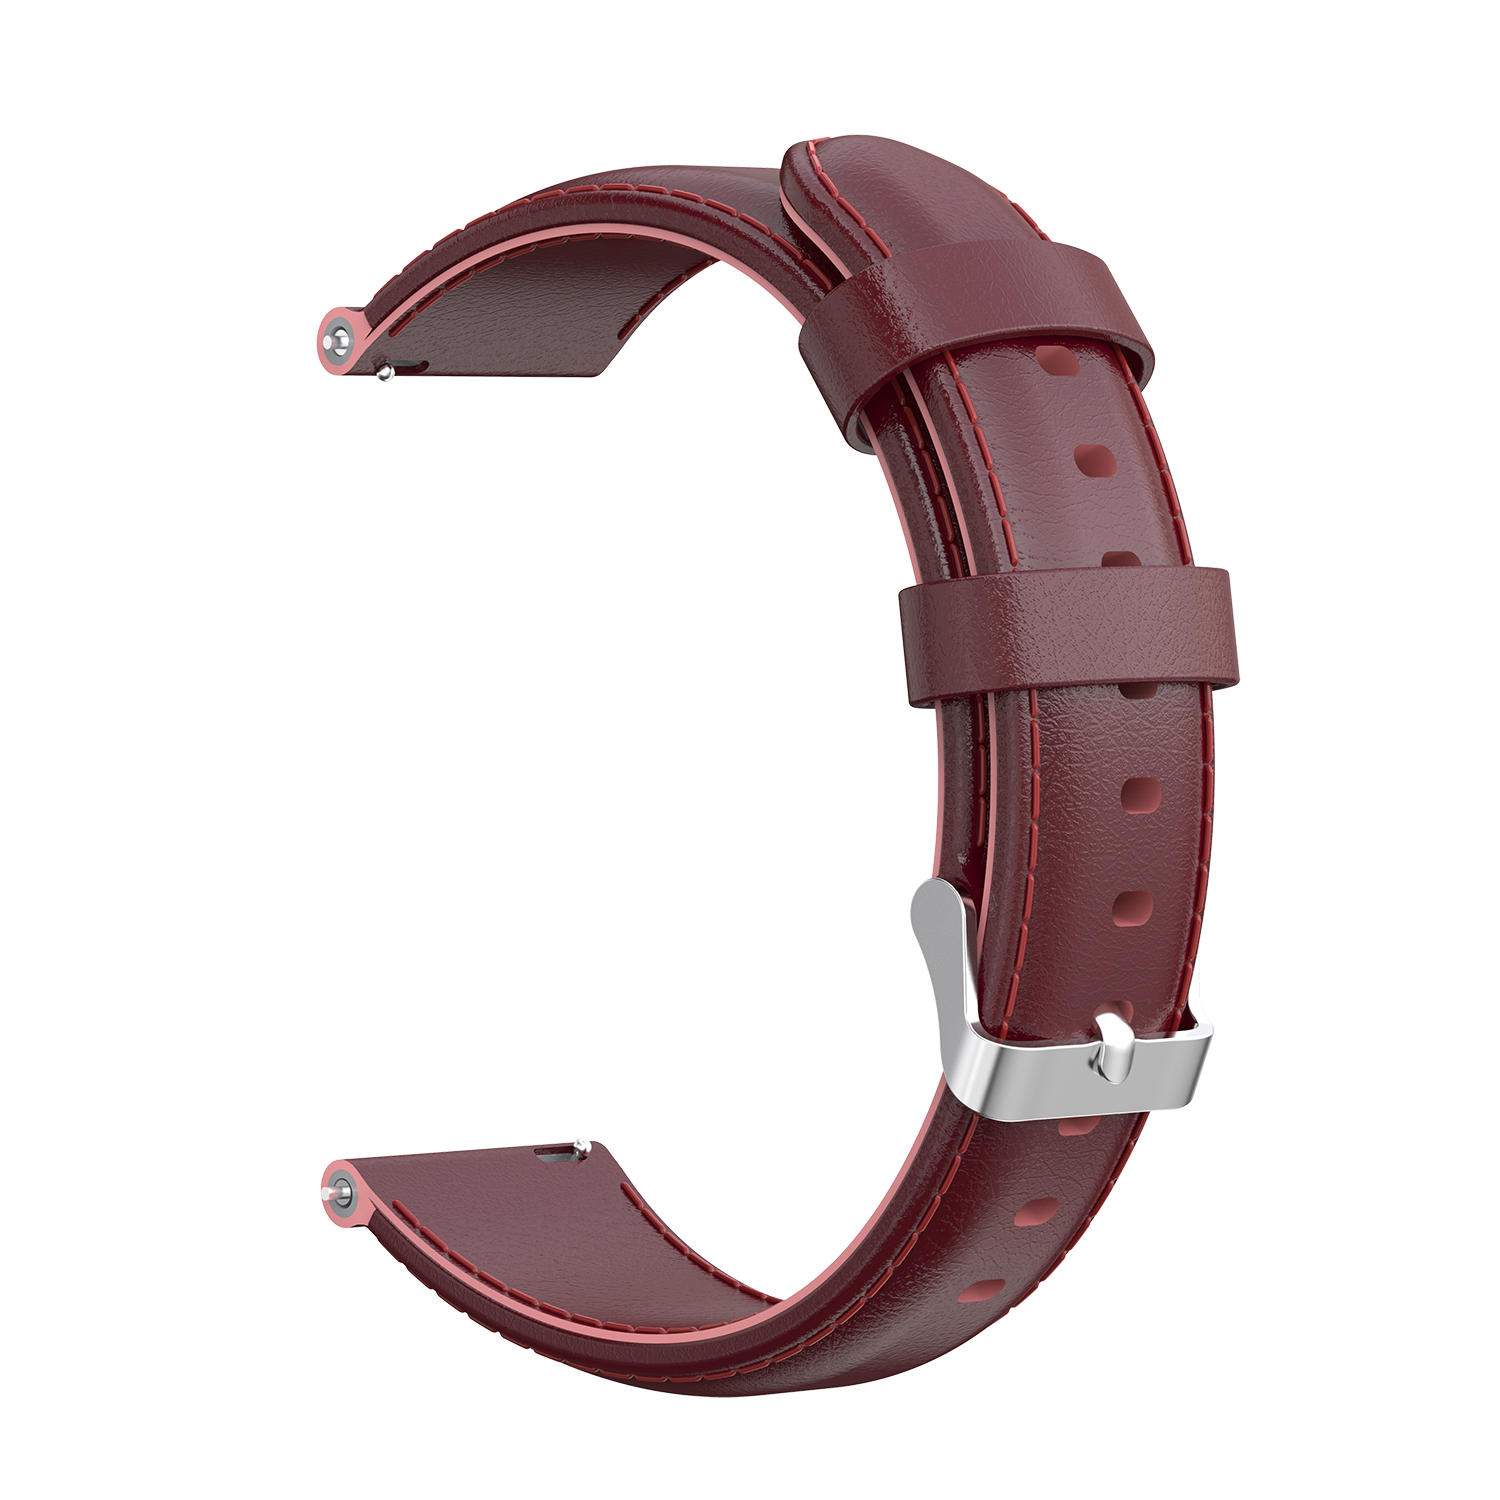 Bakeey-22mm-Genuine-Leather-Replacement-Strap-Smart-Watch-Band-For-Amazfit-GTR-47MM-1786519-18